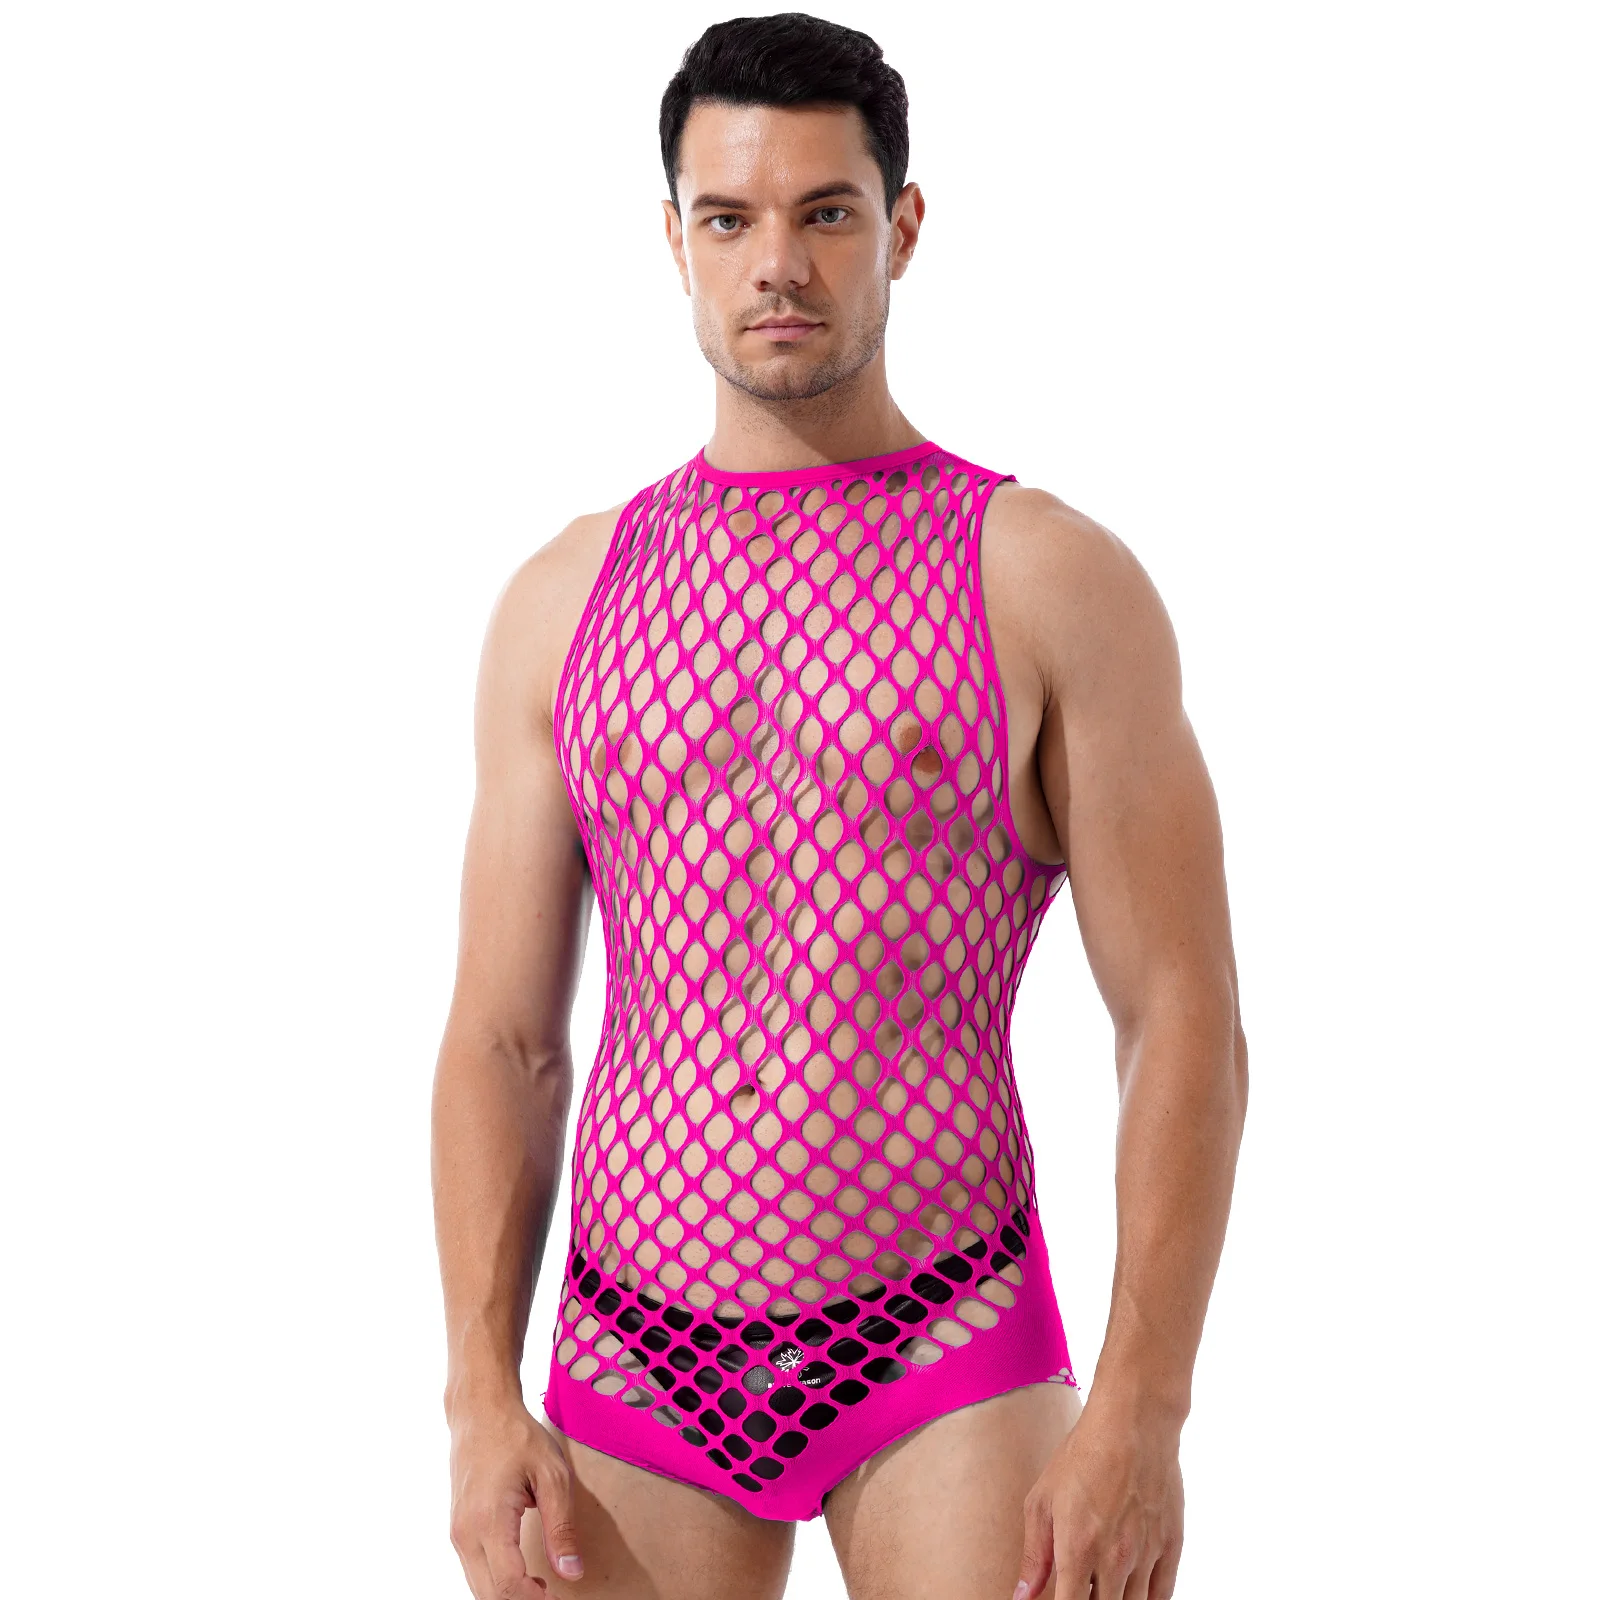 

Mens See-through Stretchy Bodysuits Nightwear One-piece Hollow Out Netted Bodystockings Lingerie Halter Neck Sleeveless Teddies